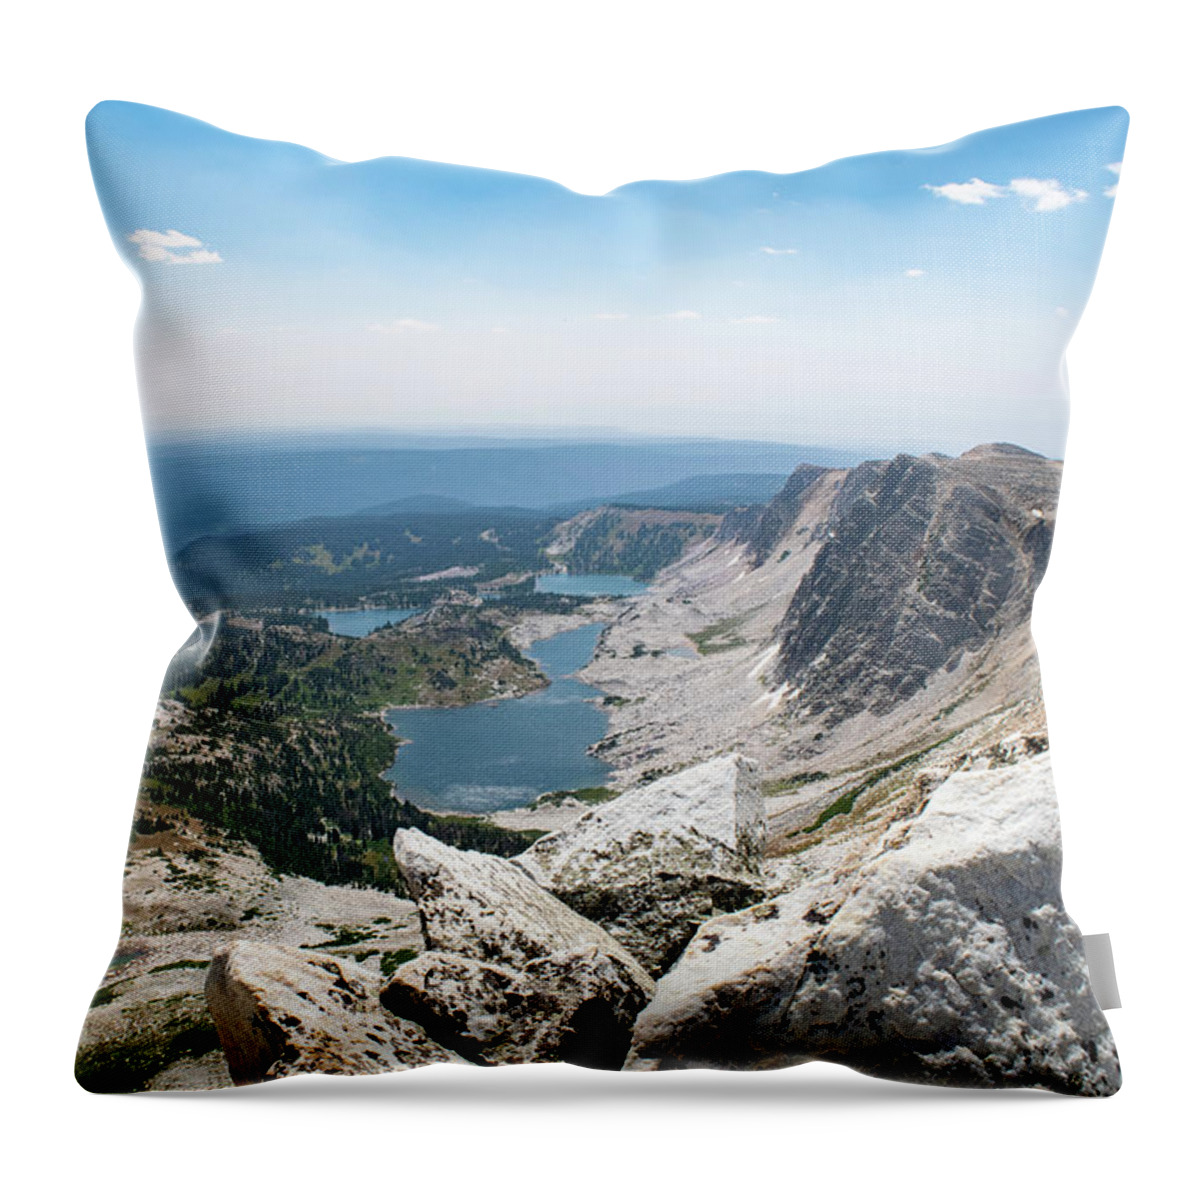 Mountain Throw Pillow featuring the photograph Medicine Bow Peak by Nicole Lloyd